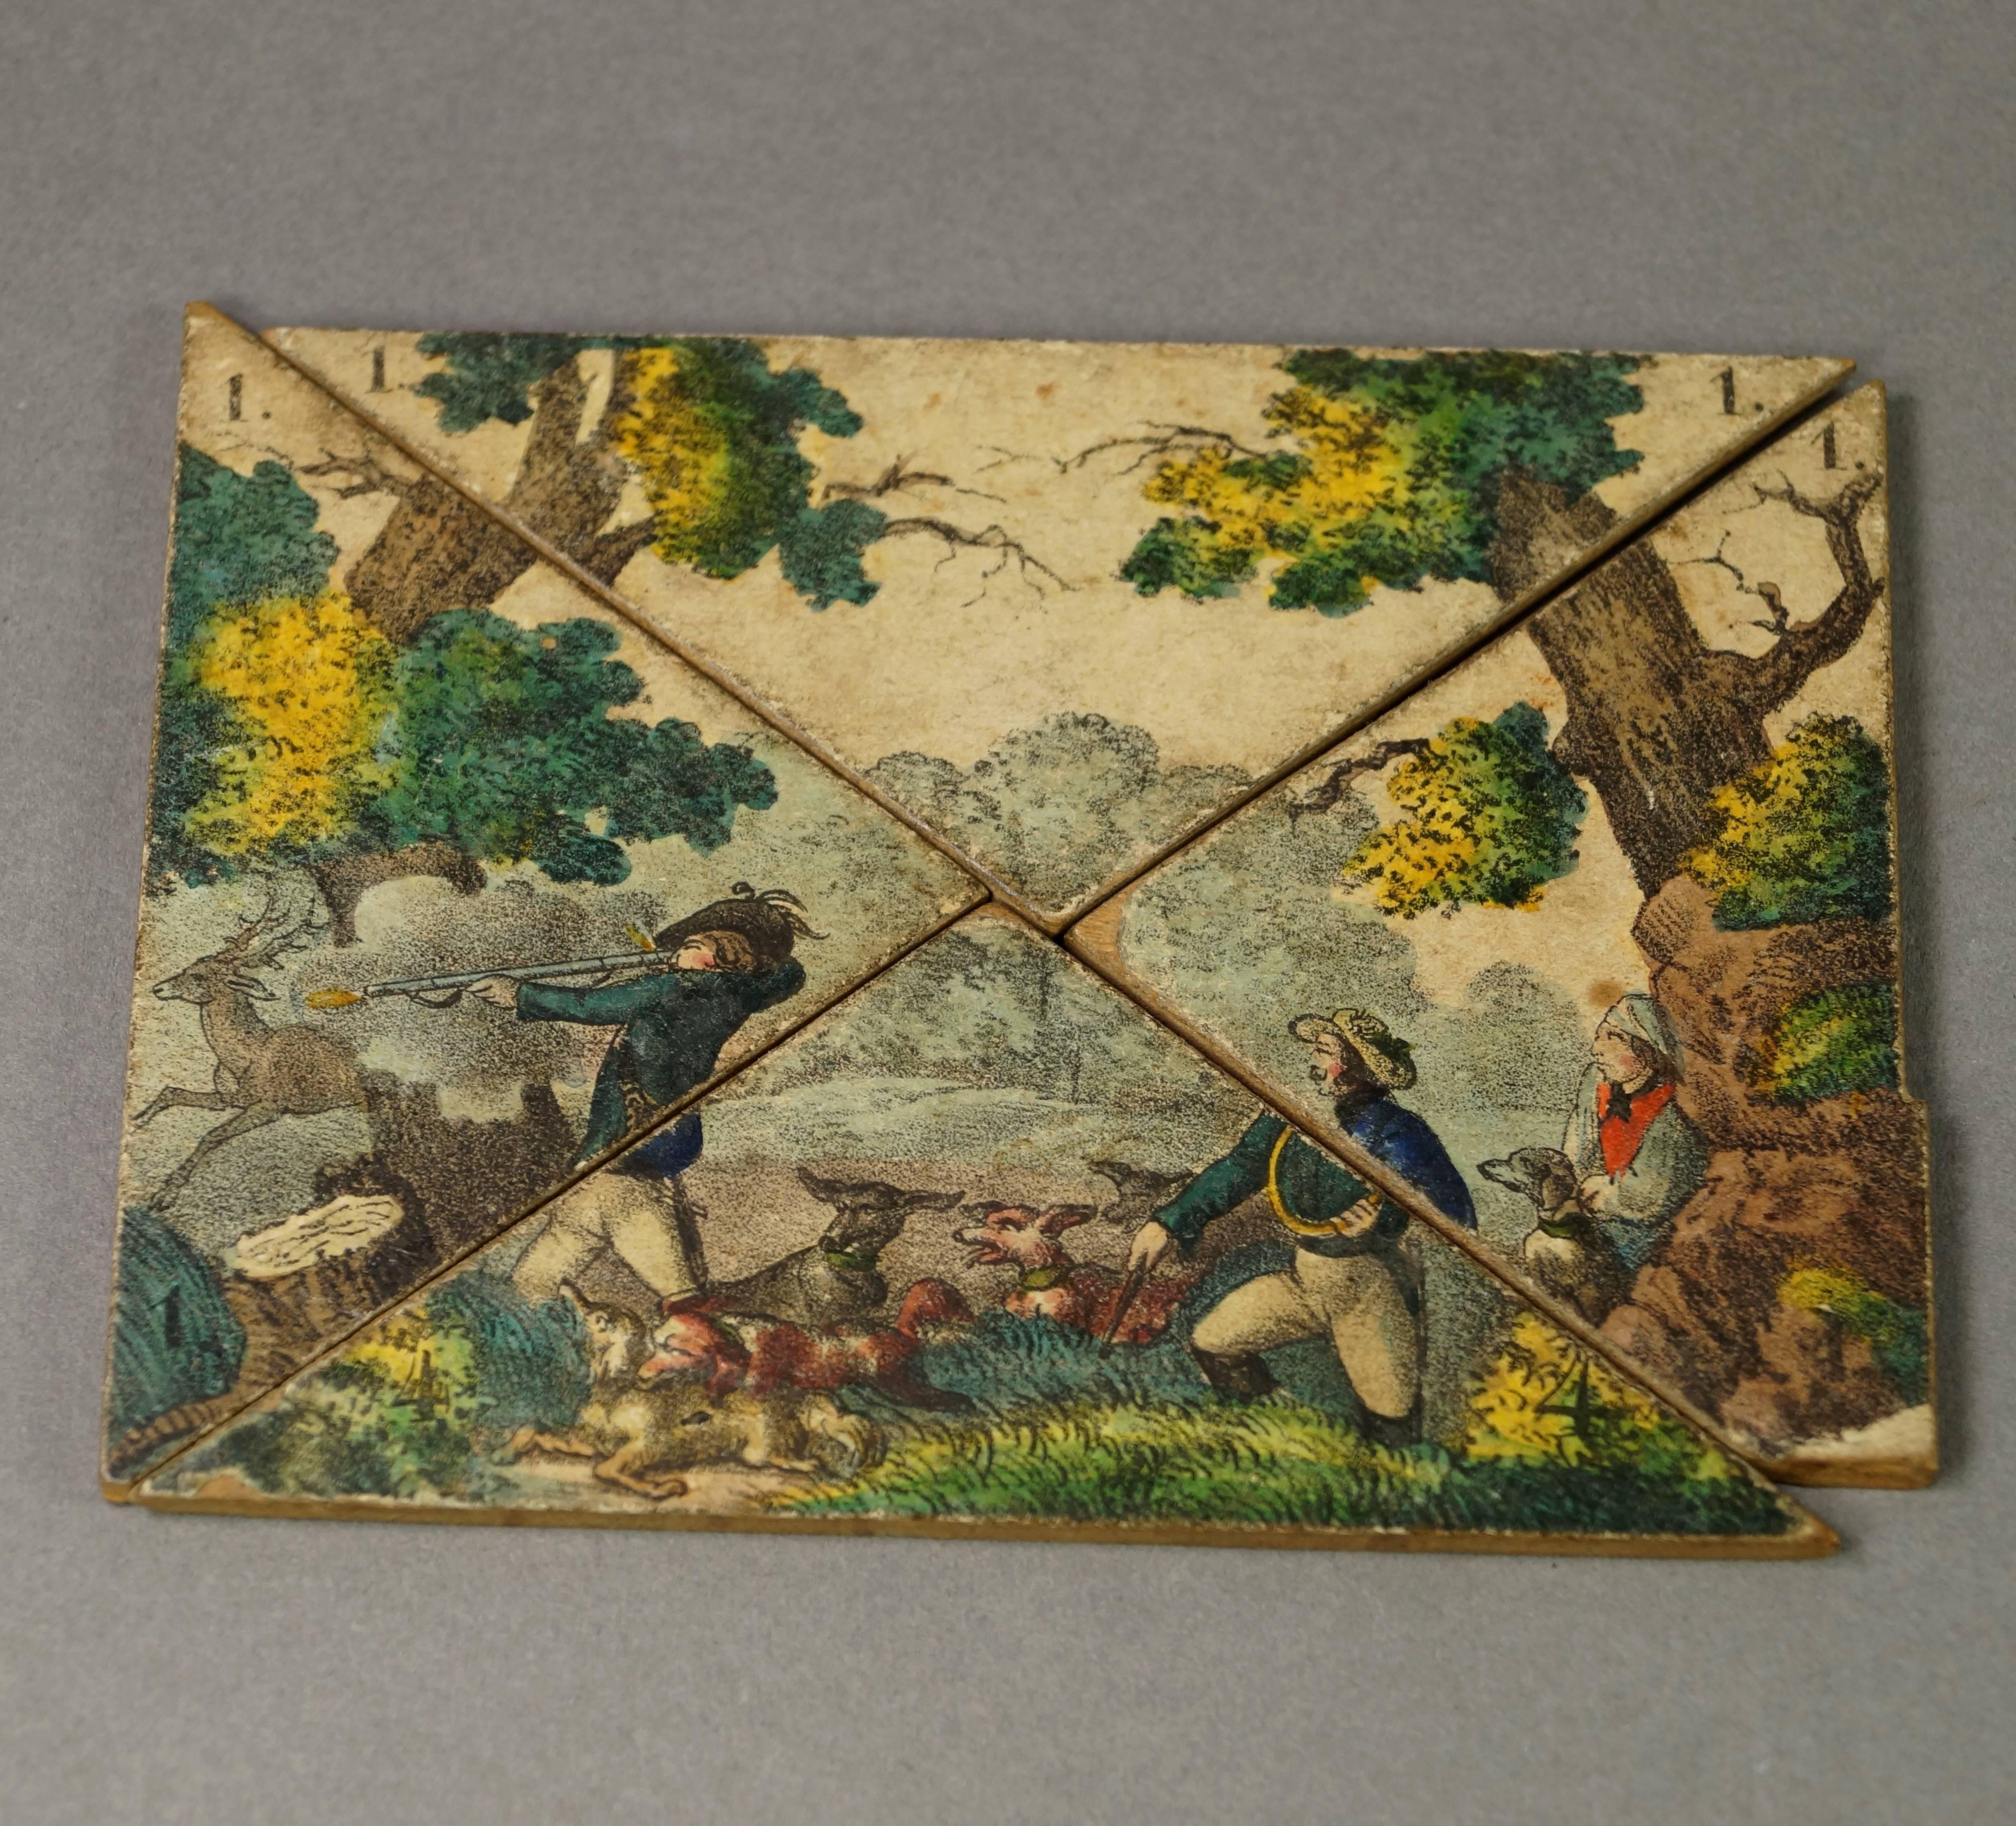 This is a rare, part set of wooden lithograph board game tiles. This part set were produced in France and date to the first half of the 19th century, circa 1840. Each tile features a hand colored lithograph scene which is dissected into four